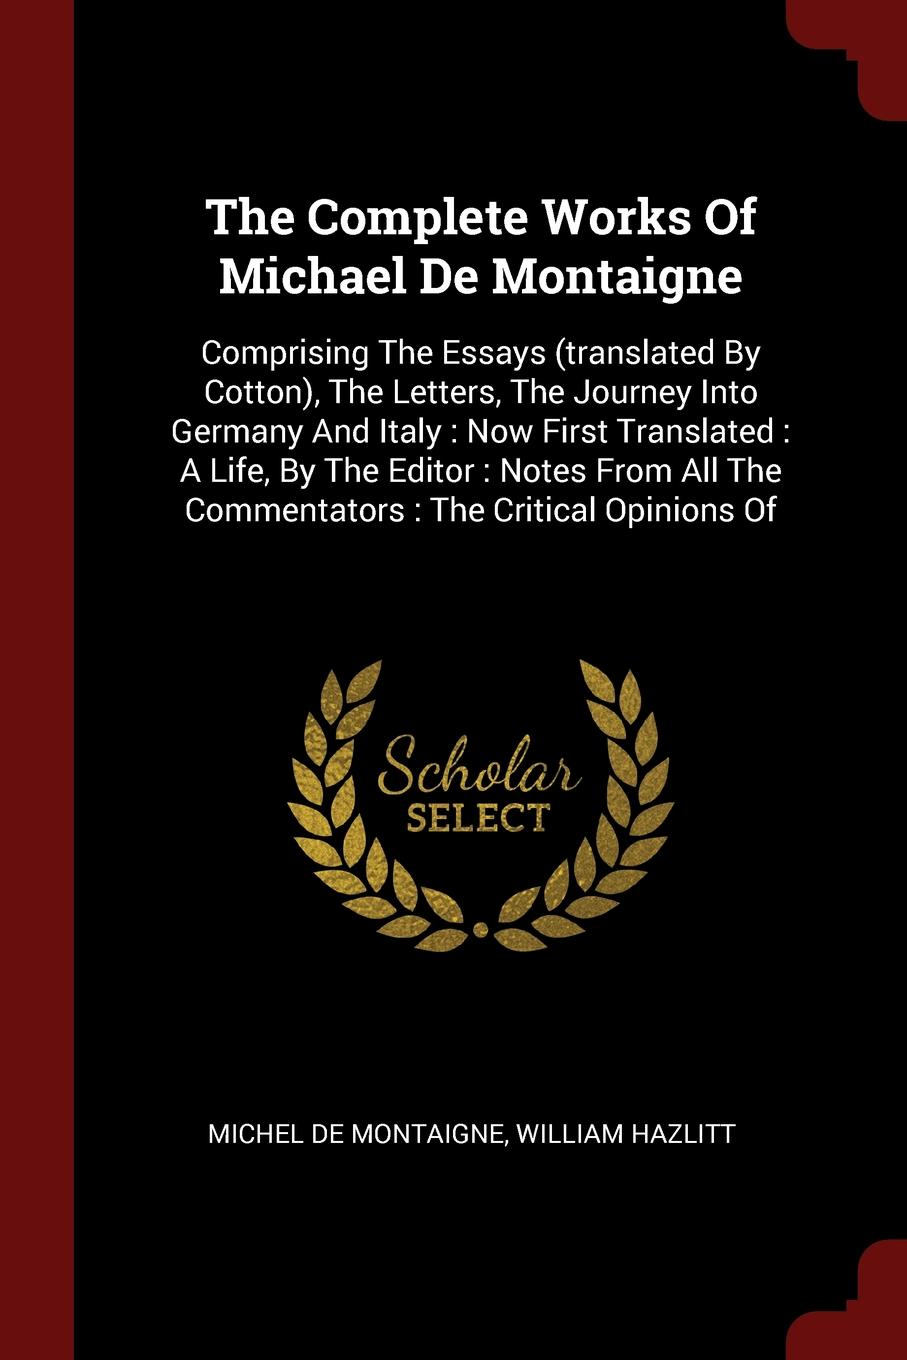 The Complete Works Of Michael De Montaigne. Comprising The Essays (translated By Cotton), The Letters, The Journey Into Germany And Italy : Now First Translated : A Life, By The Editor : Notes From All The Commentators : The Critical Opinions Of